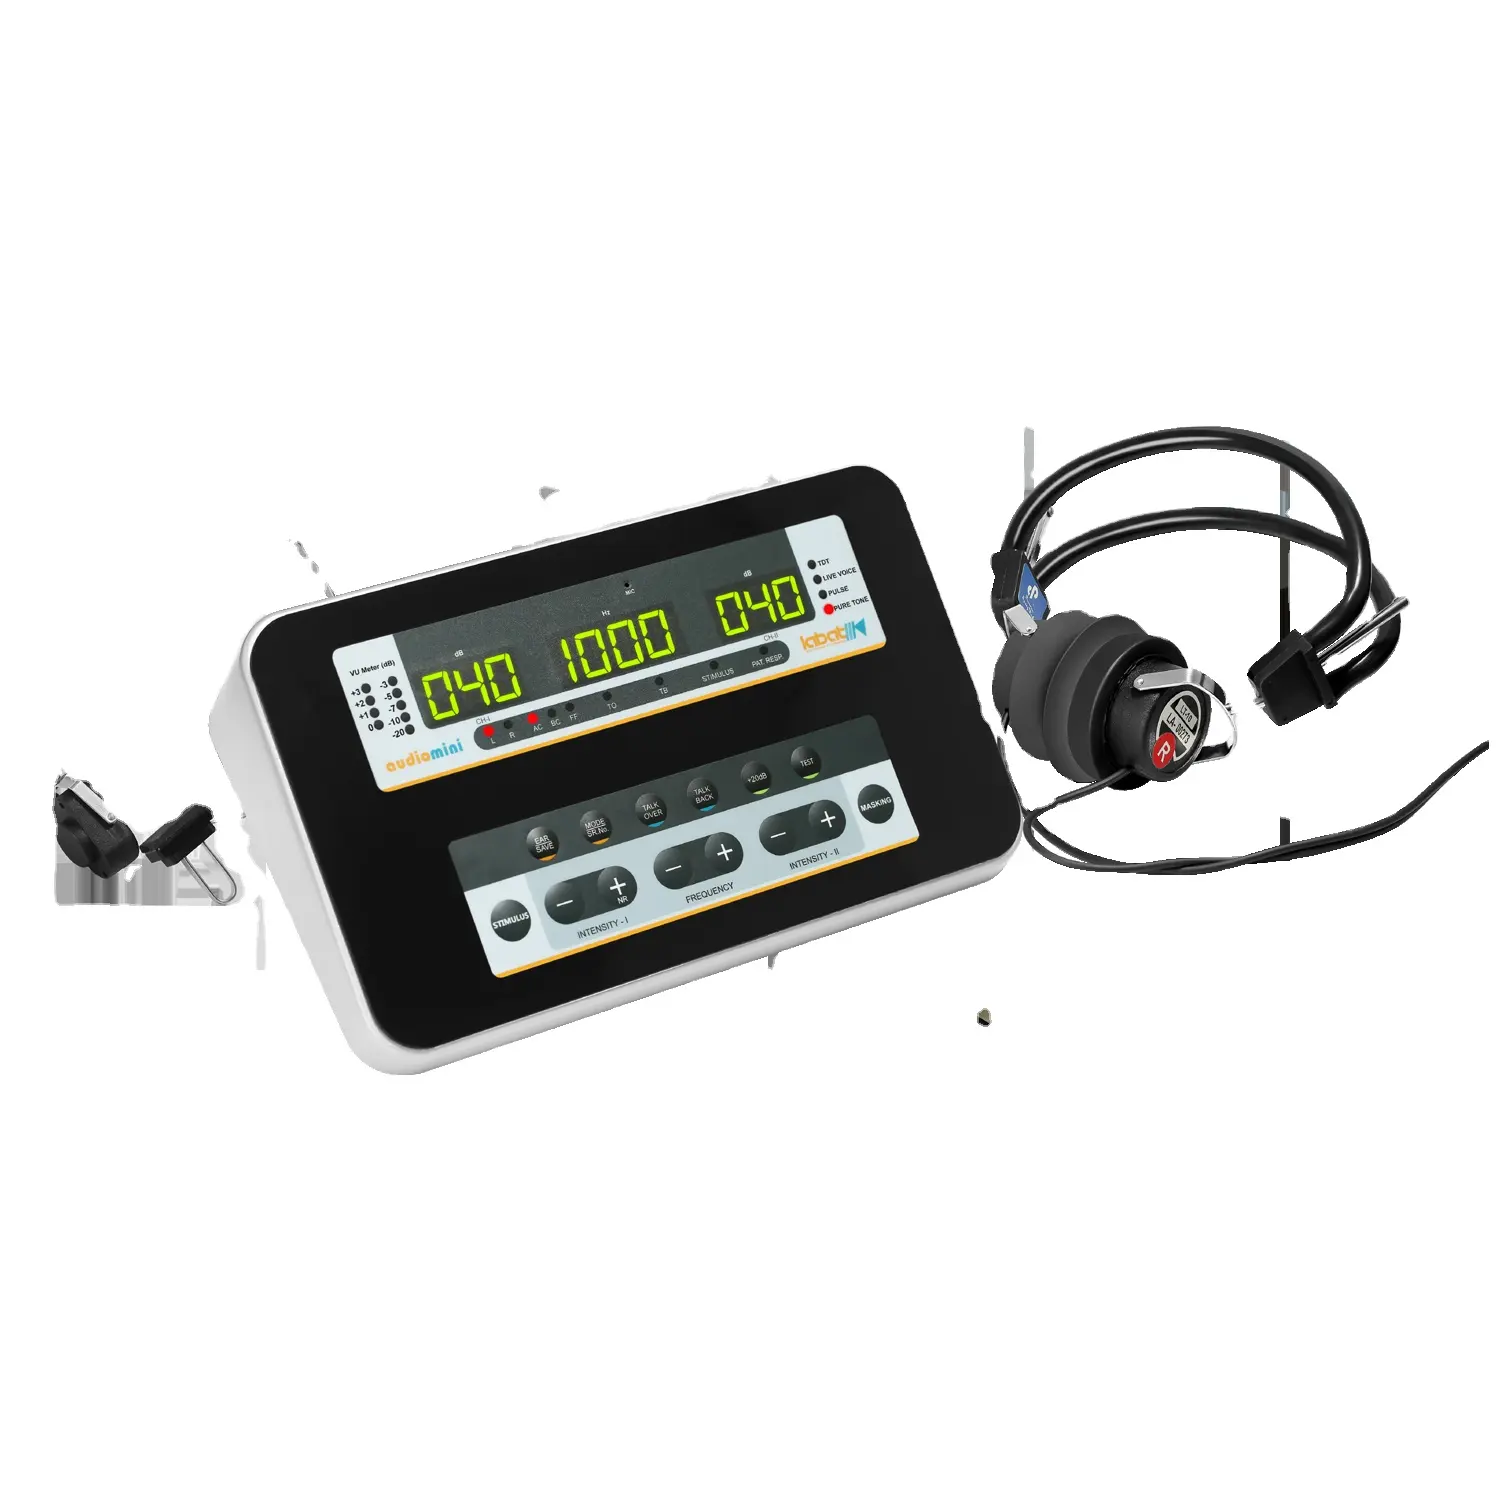 good price Hearing Check medical device audiometer Easy operation Digital Audiometer 2 channels audiometer